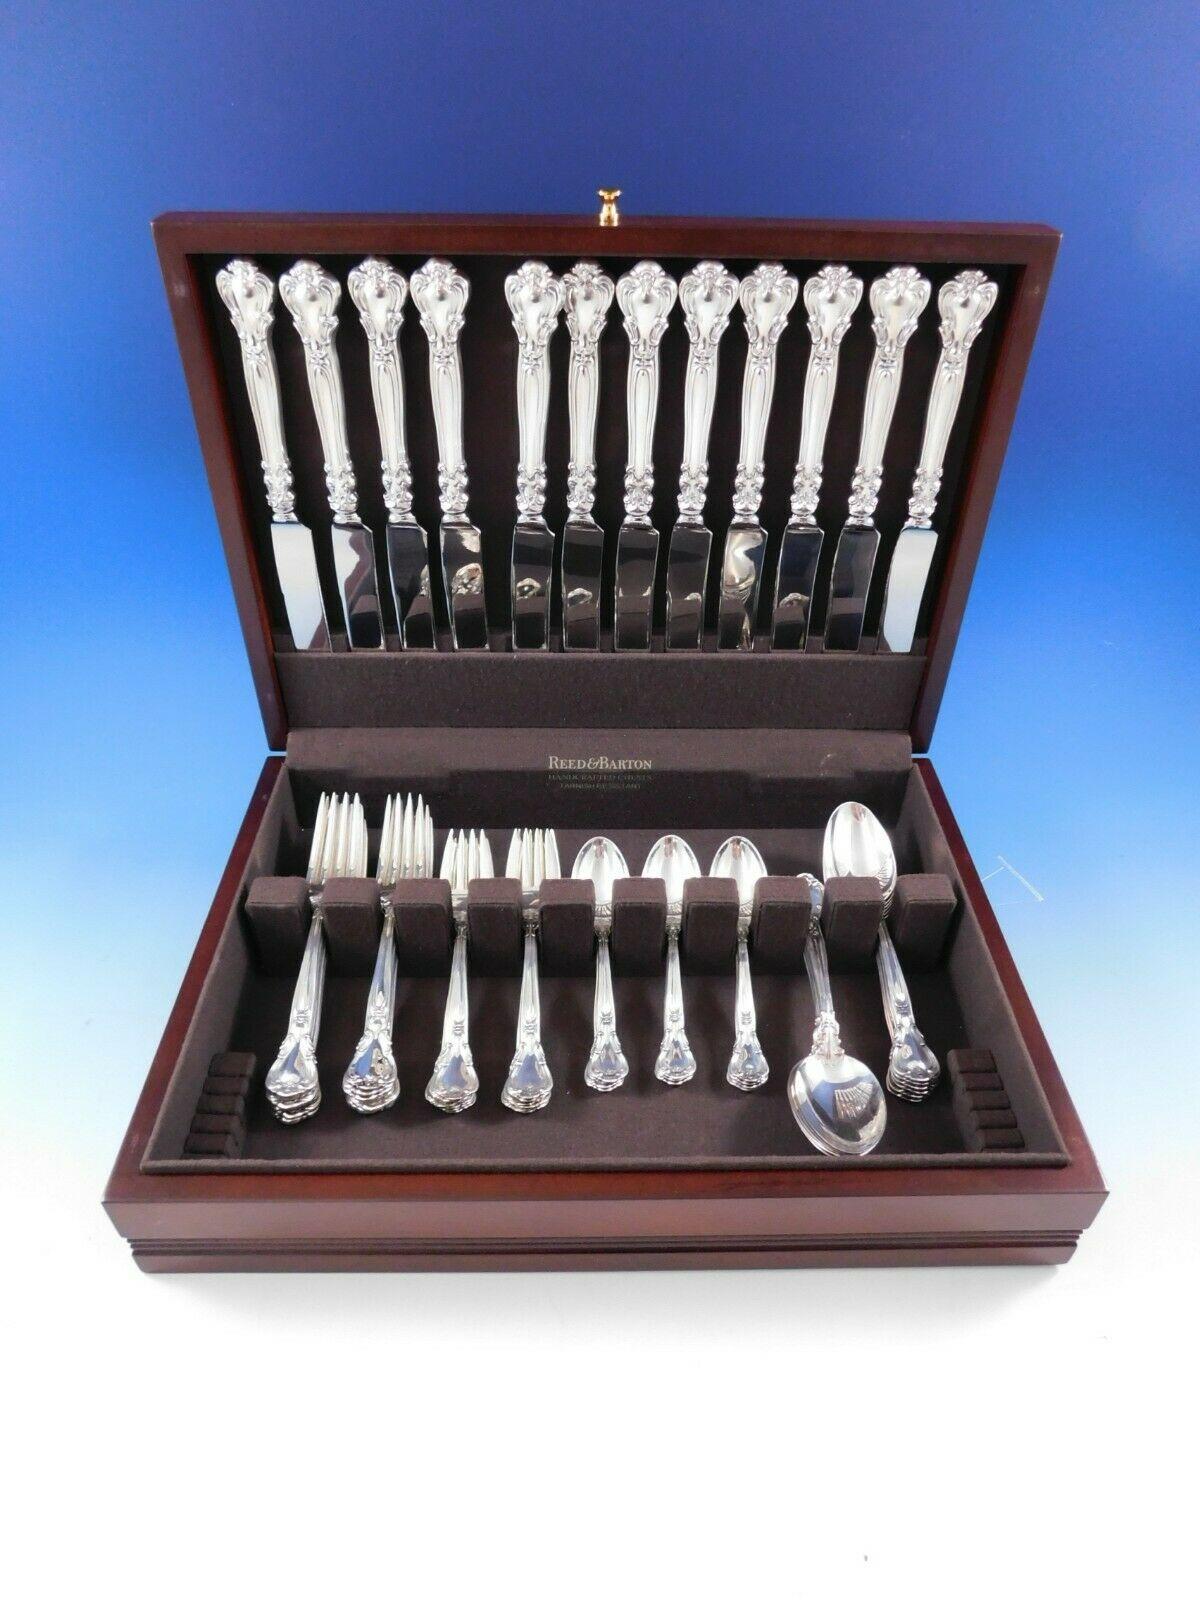 Chantilly by Gorham sterling silver Flatware set, 60 pieces. This set includes massive Continental size dinner knives and large/wide dinner forks. This set includes:

12 massive continental size knives, 10 3/8